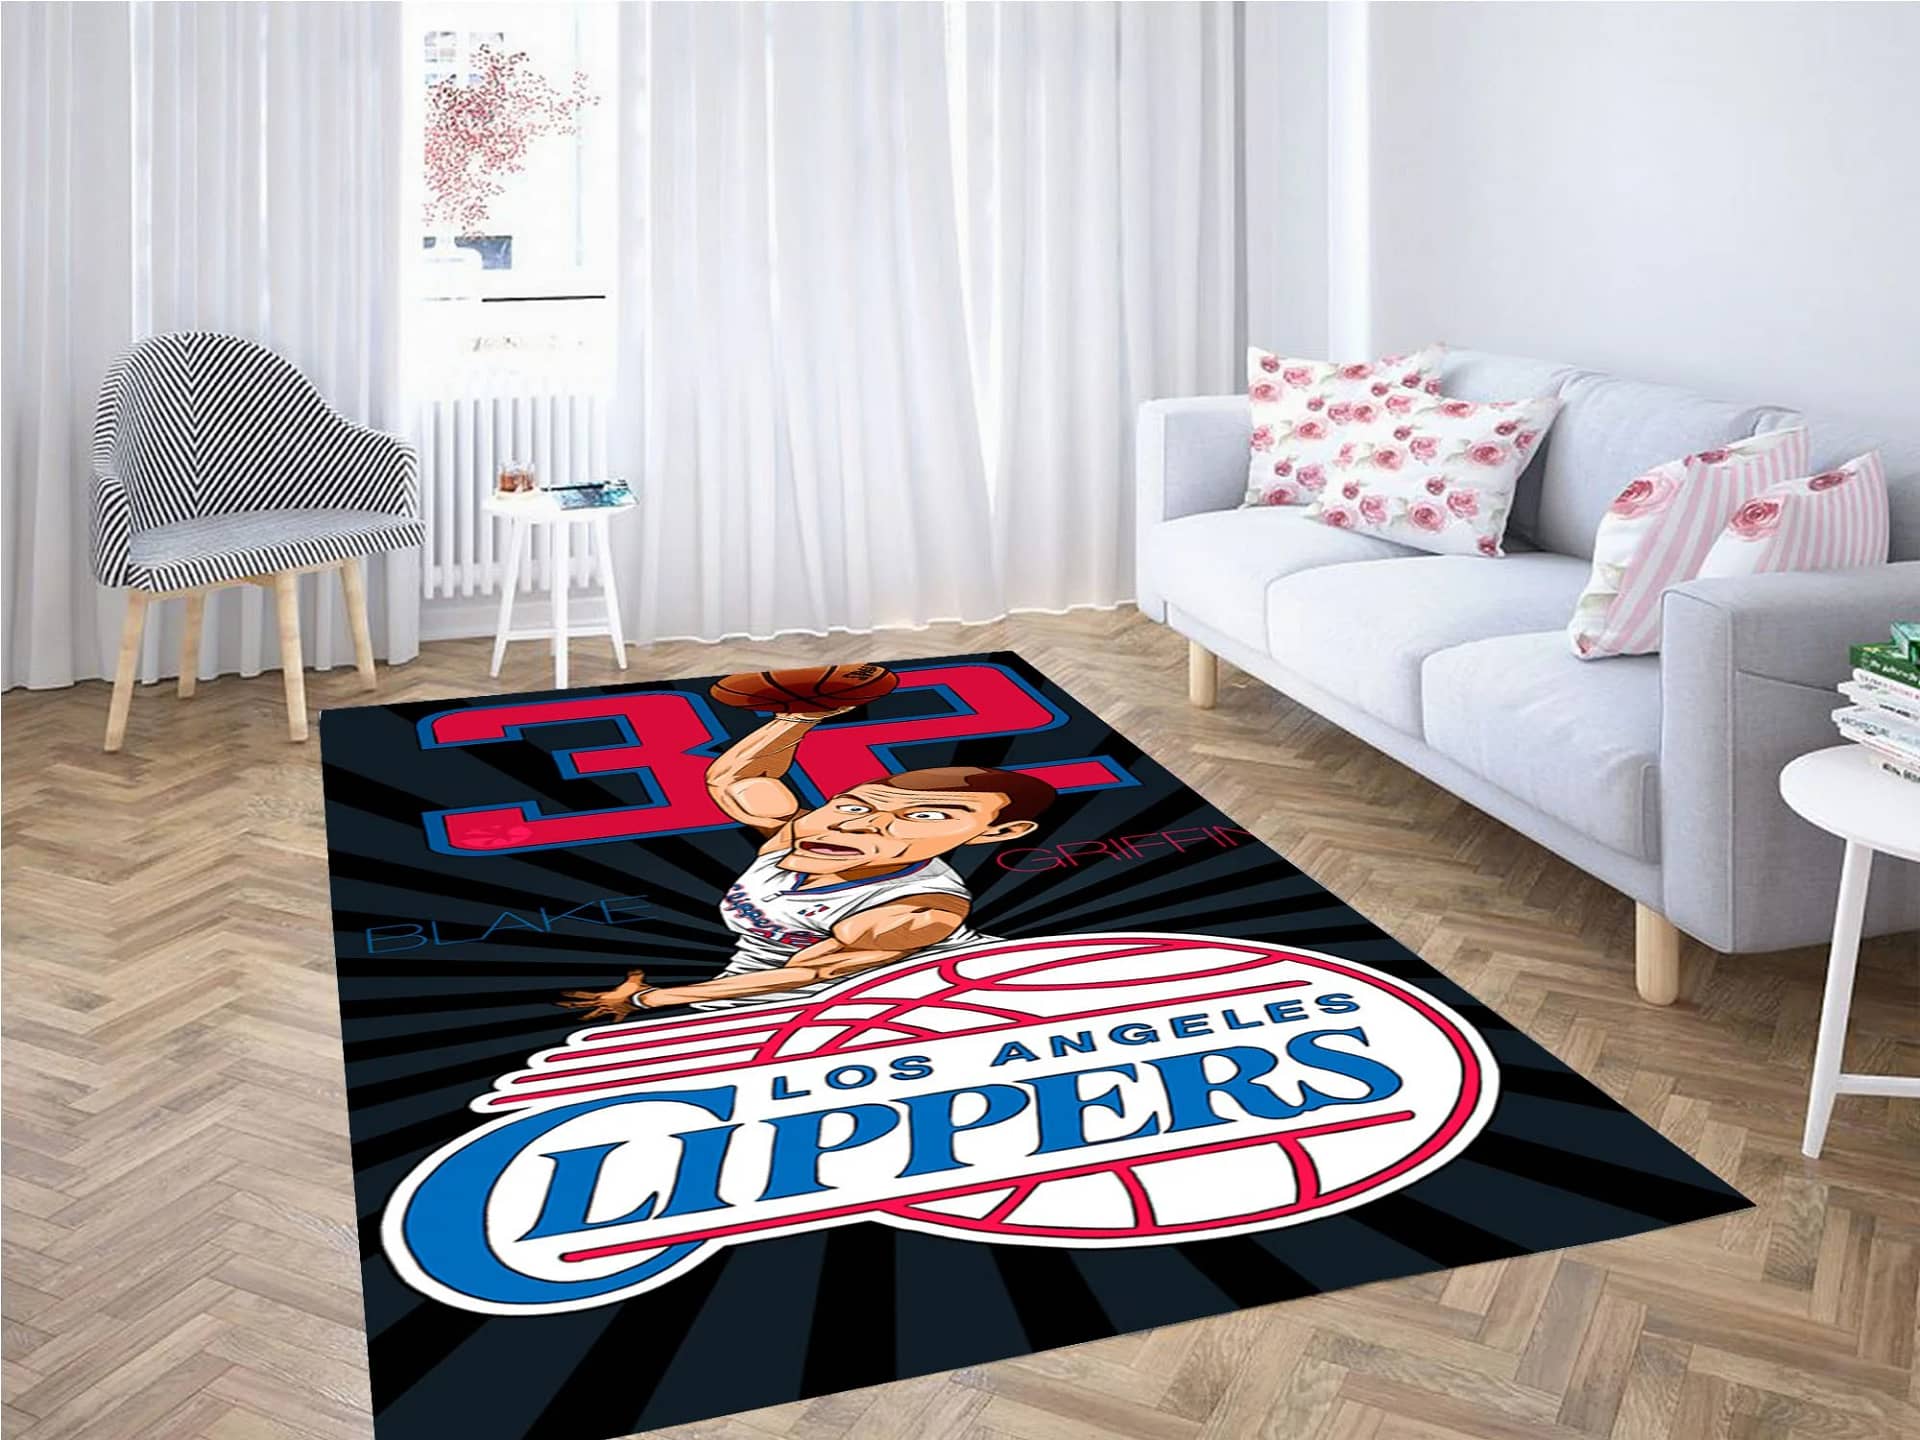 Los Angeles Clippers Wallpaper Carpet Rug